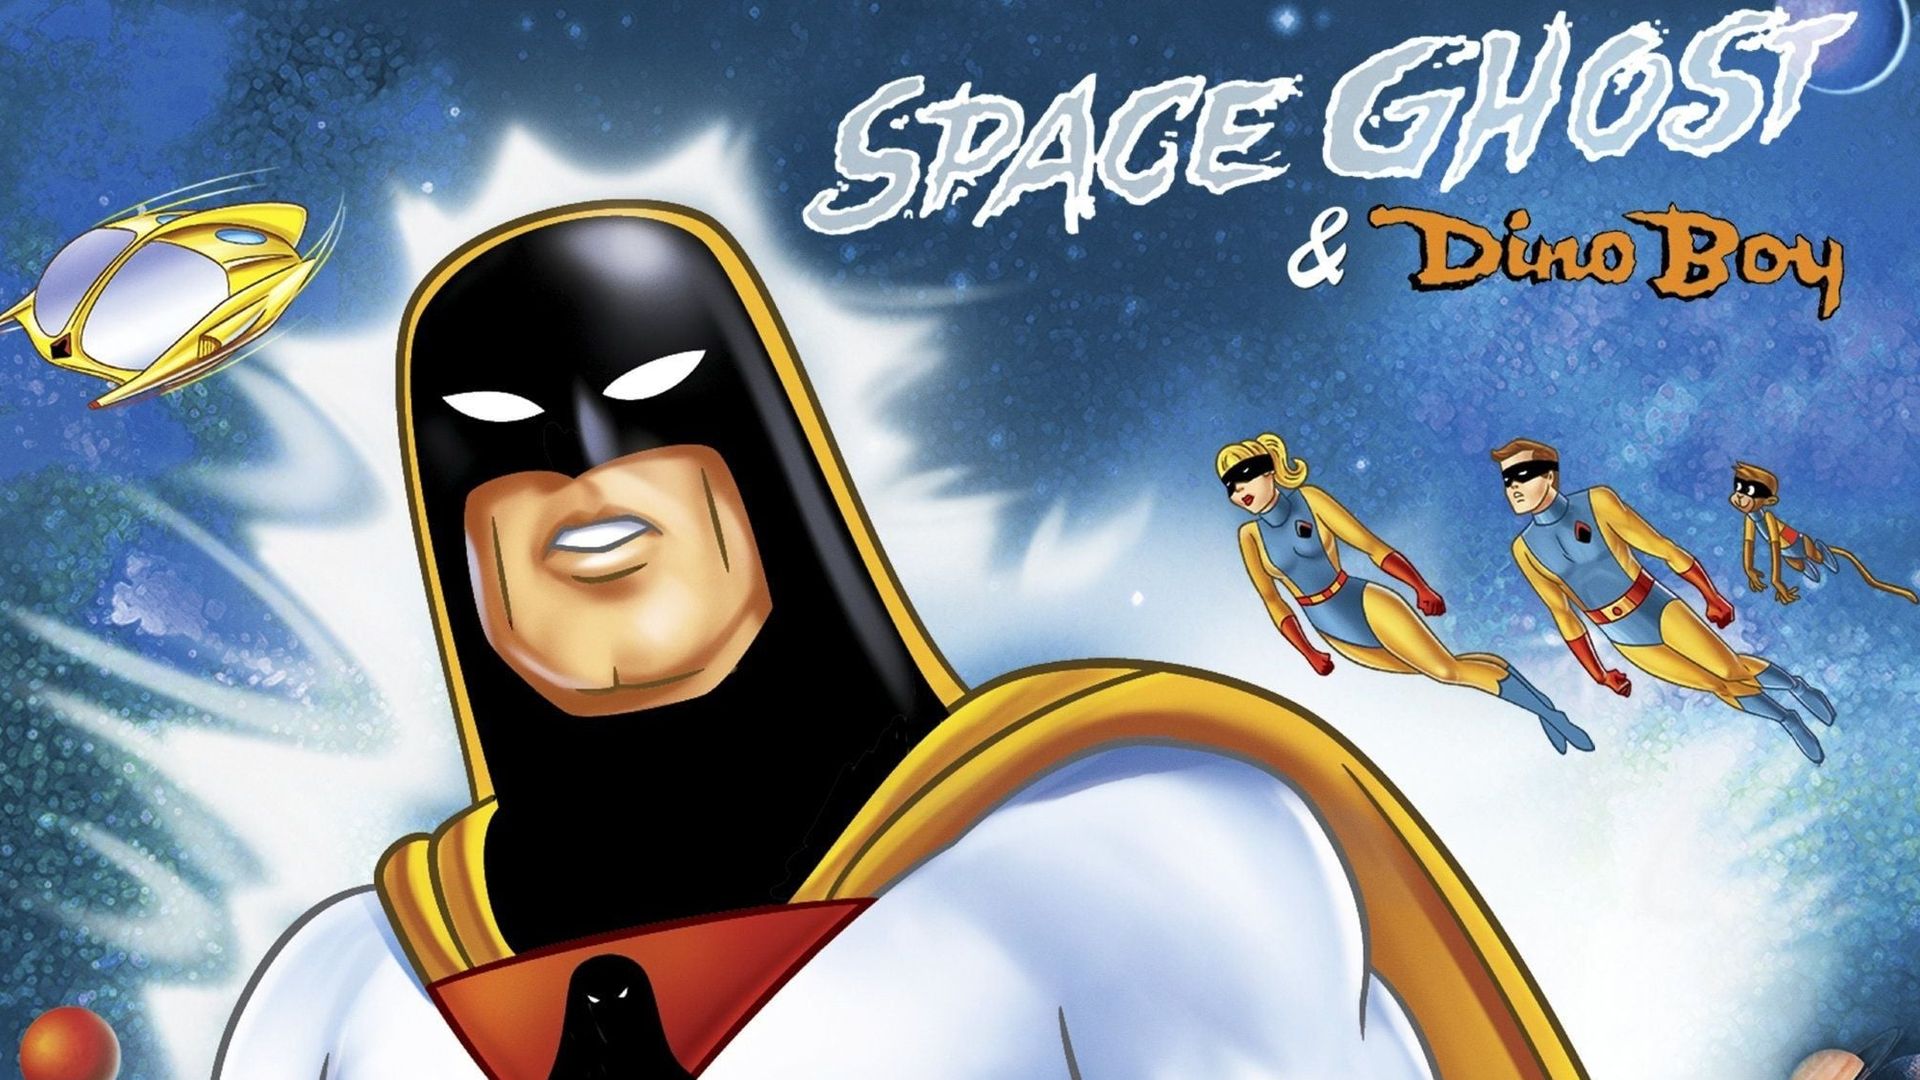 Space Ghost background